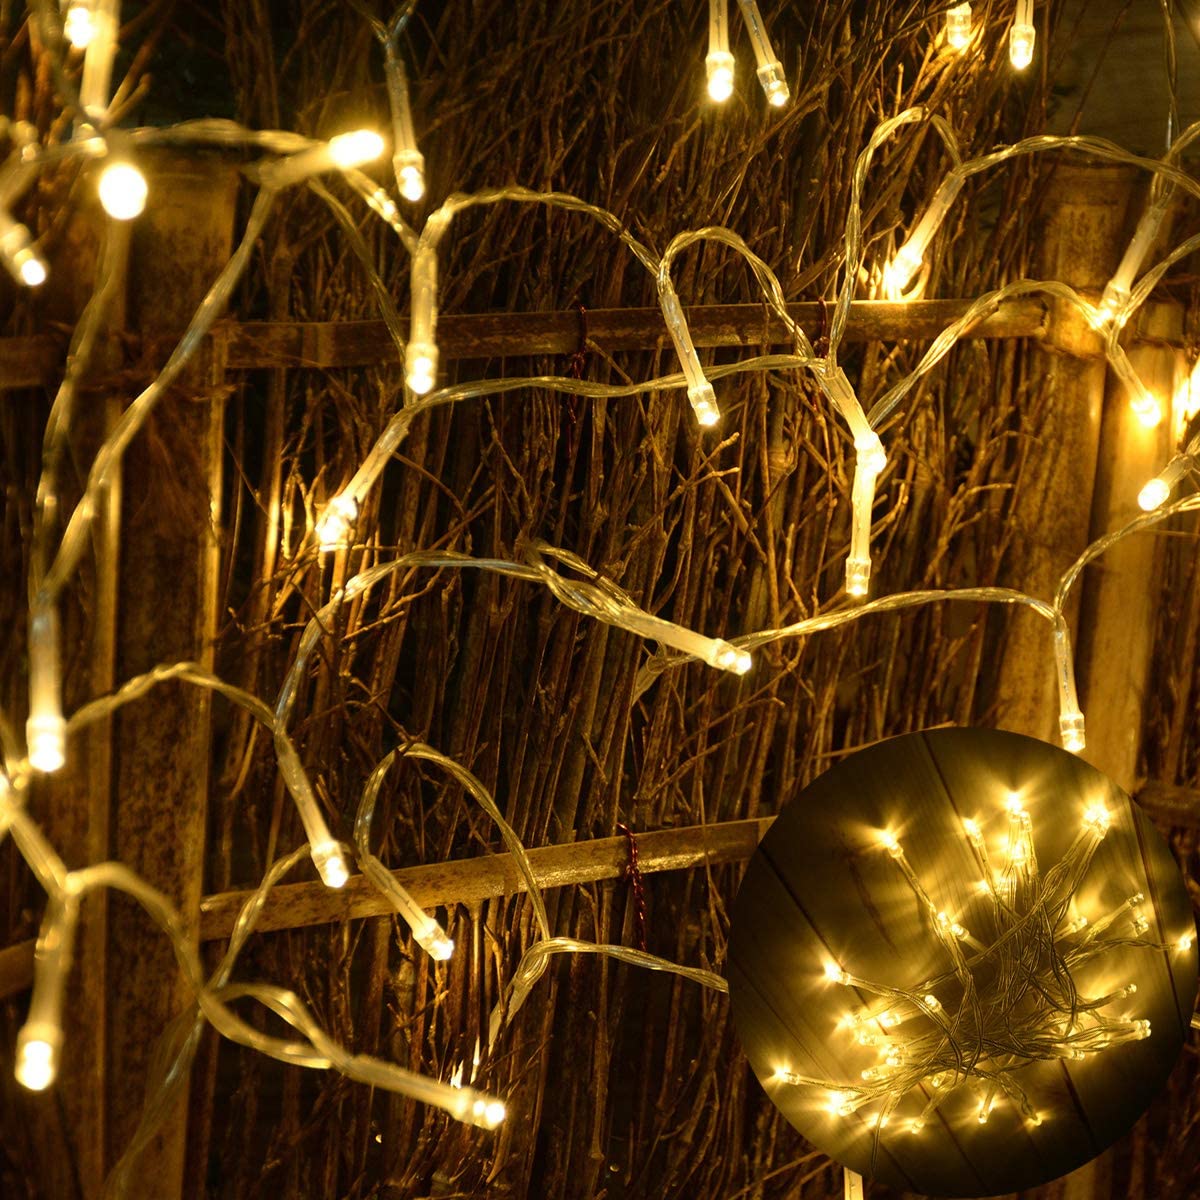 WholeSale Christmas LED Fairy String Lights, 50 LED Mini Bulb LED Battery Powered String Umbrella Lights Bedroom Ambient Decor Light String for Indoor Wedding Party Christmas Holiday Decor, Warm White - image 2 of 11